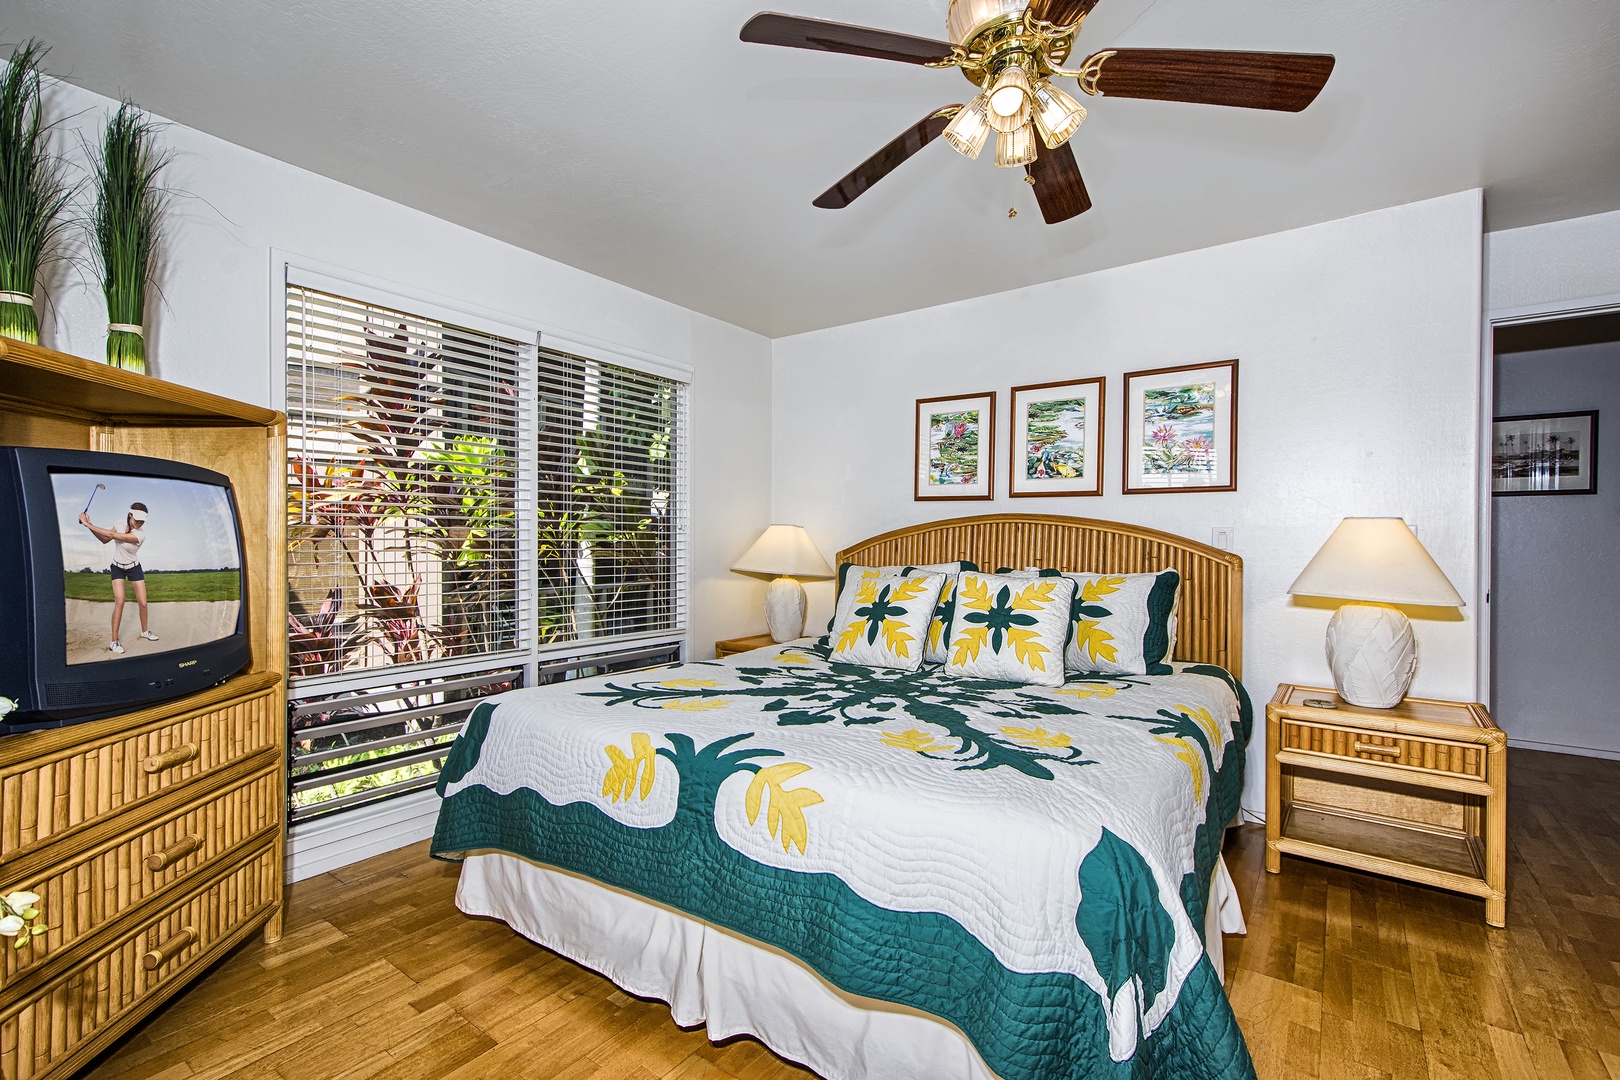 Kailua Kona Vacation Rentals, Kanaloa at Kona 701 - Primary bedroom equipped with a King bed and central A/C